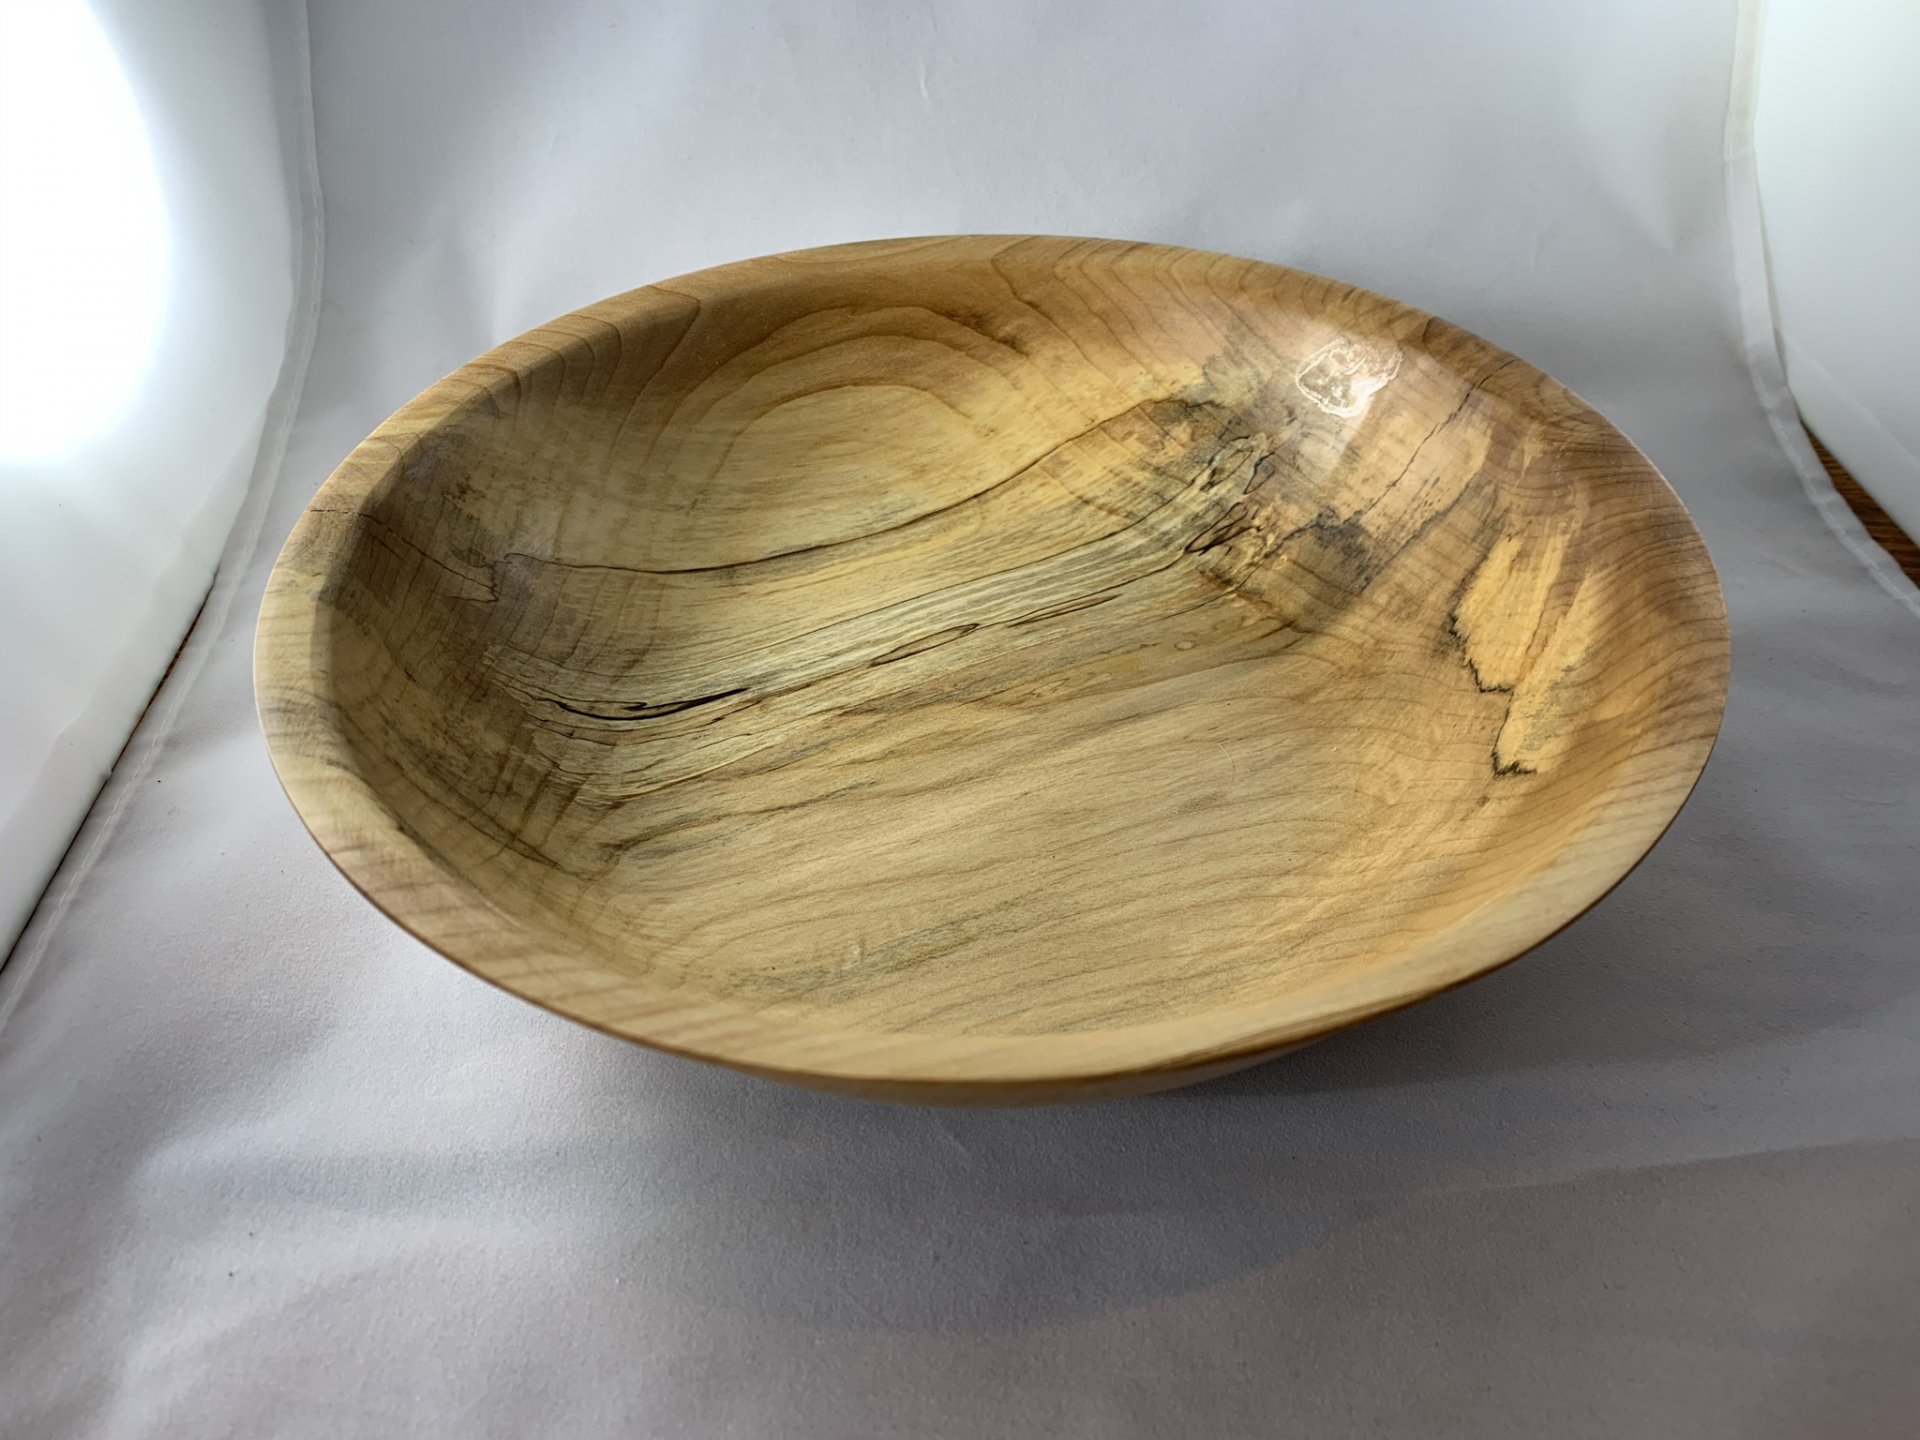 Spalted sycamore bowl